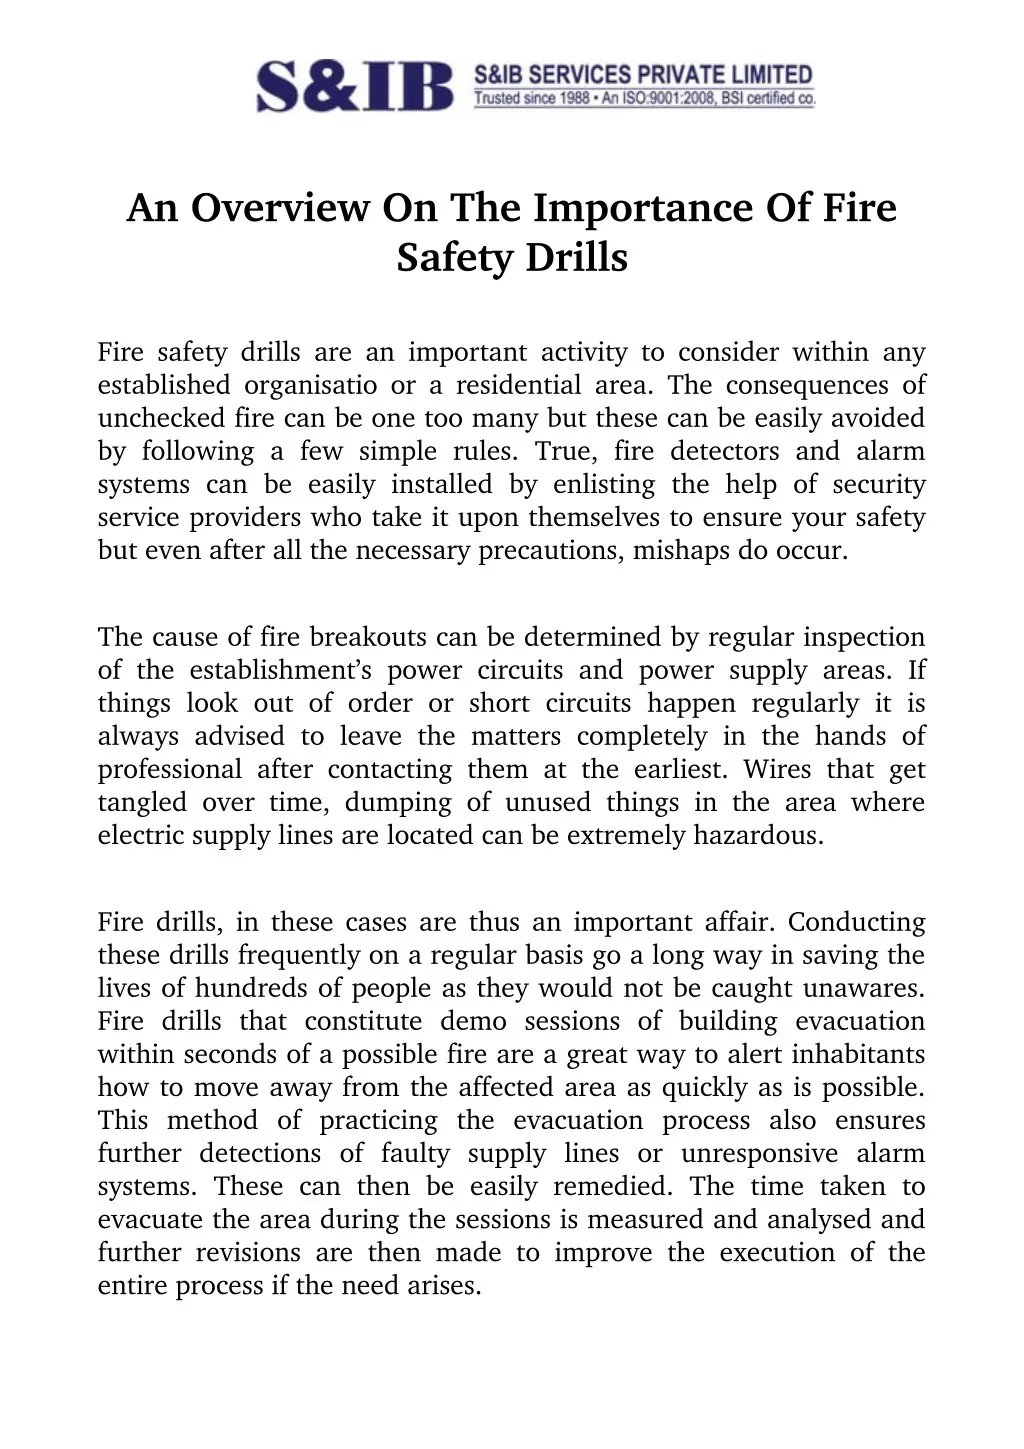 an overview on the importance of fire safety